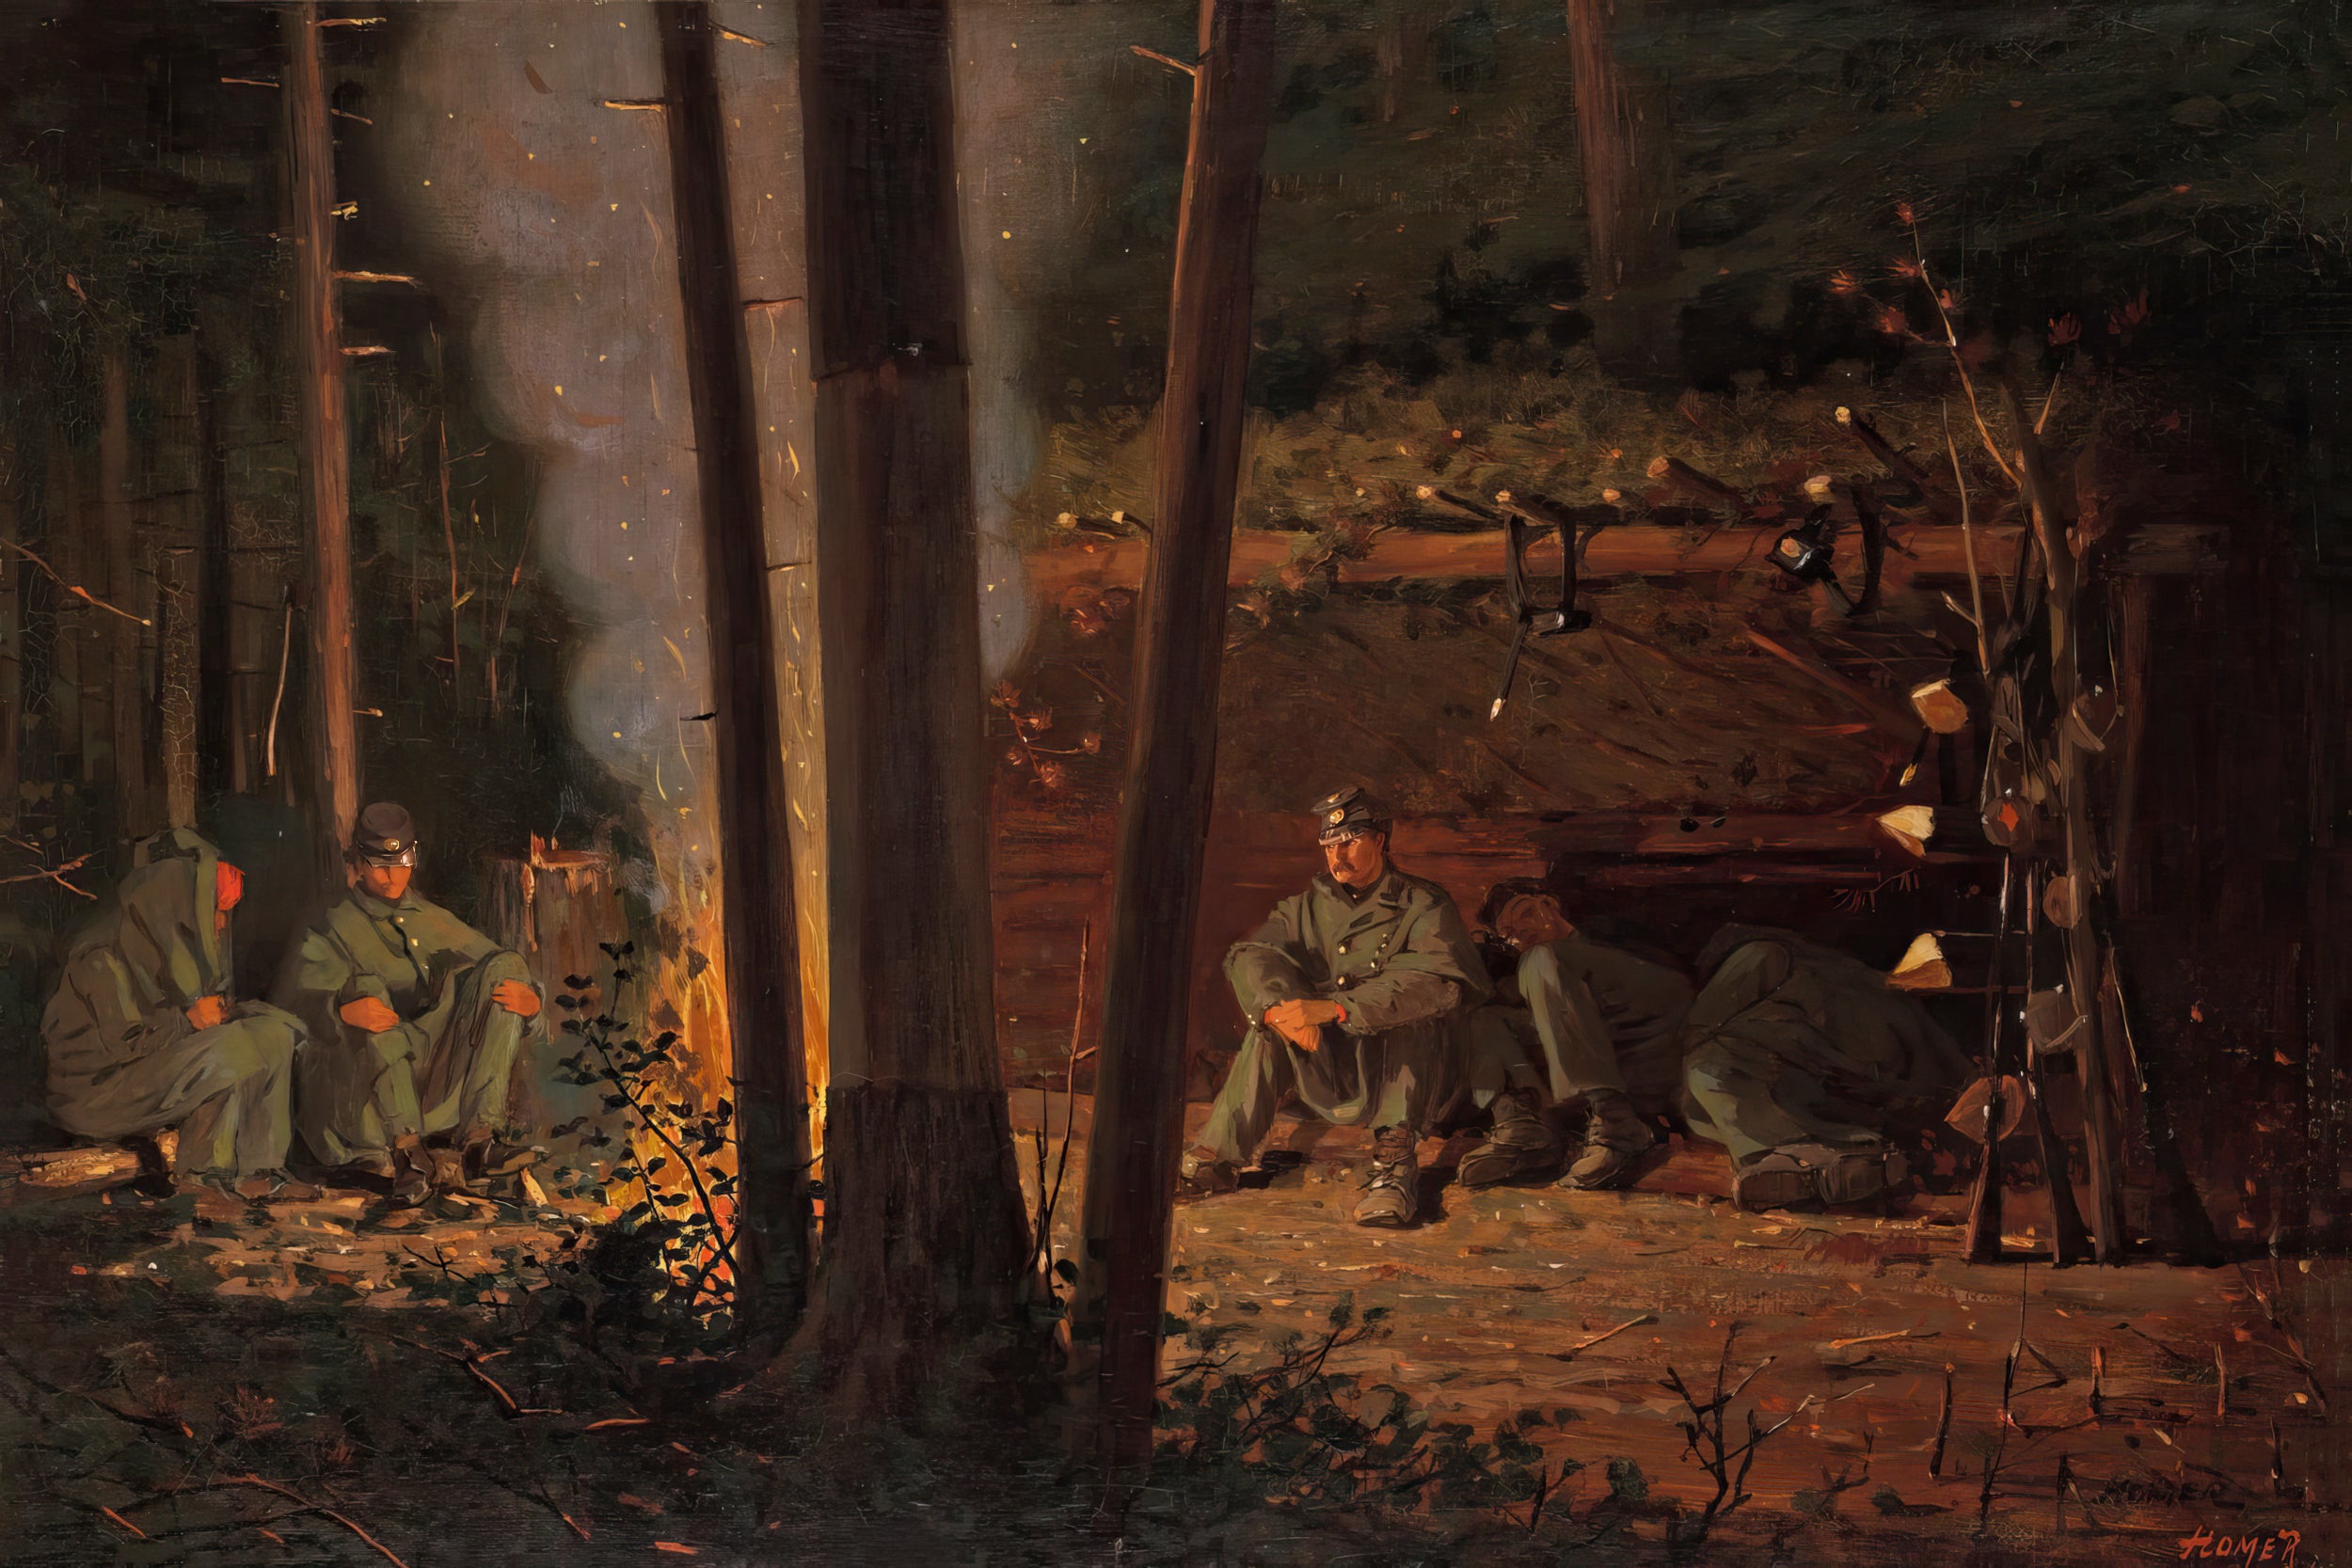 In Front of Yorktown (Painting)